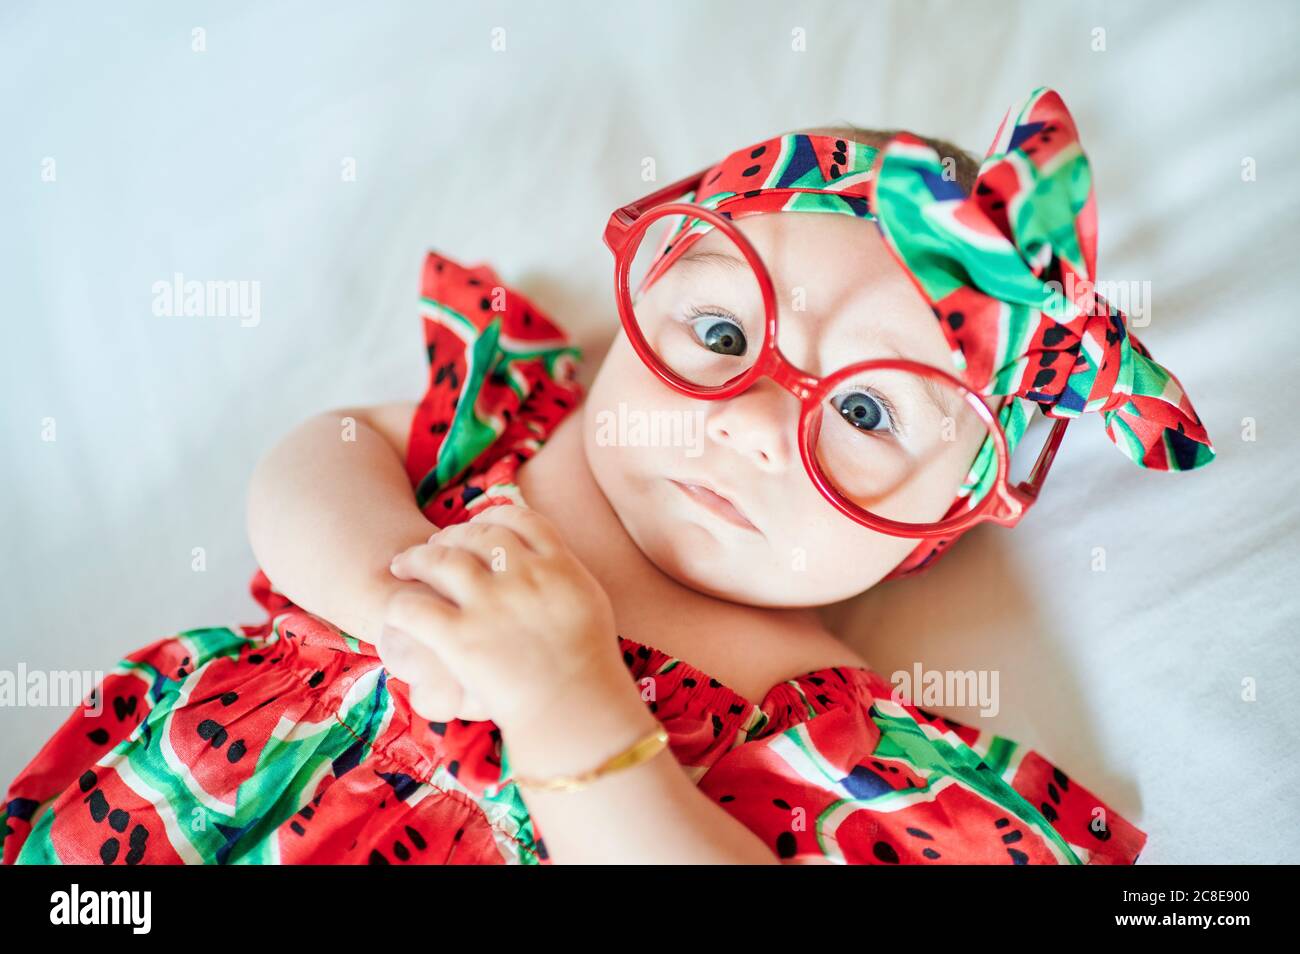 Portrait of baby girl in summer dress with oversized glasses Stock Photo